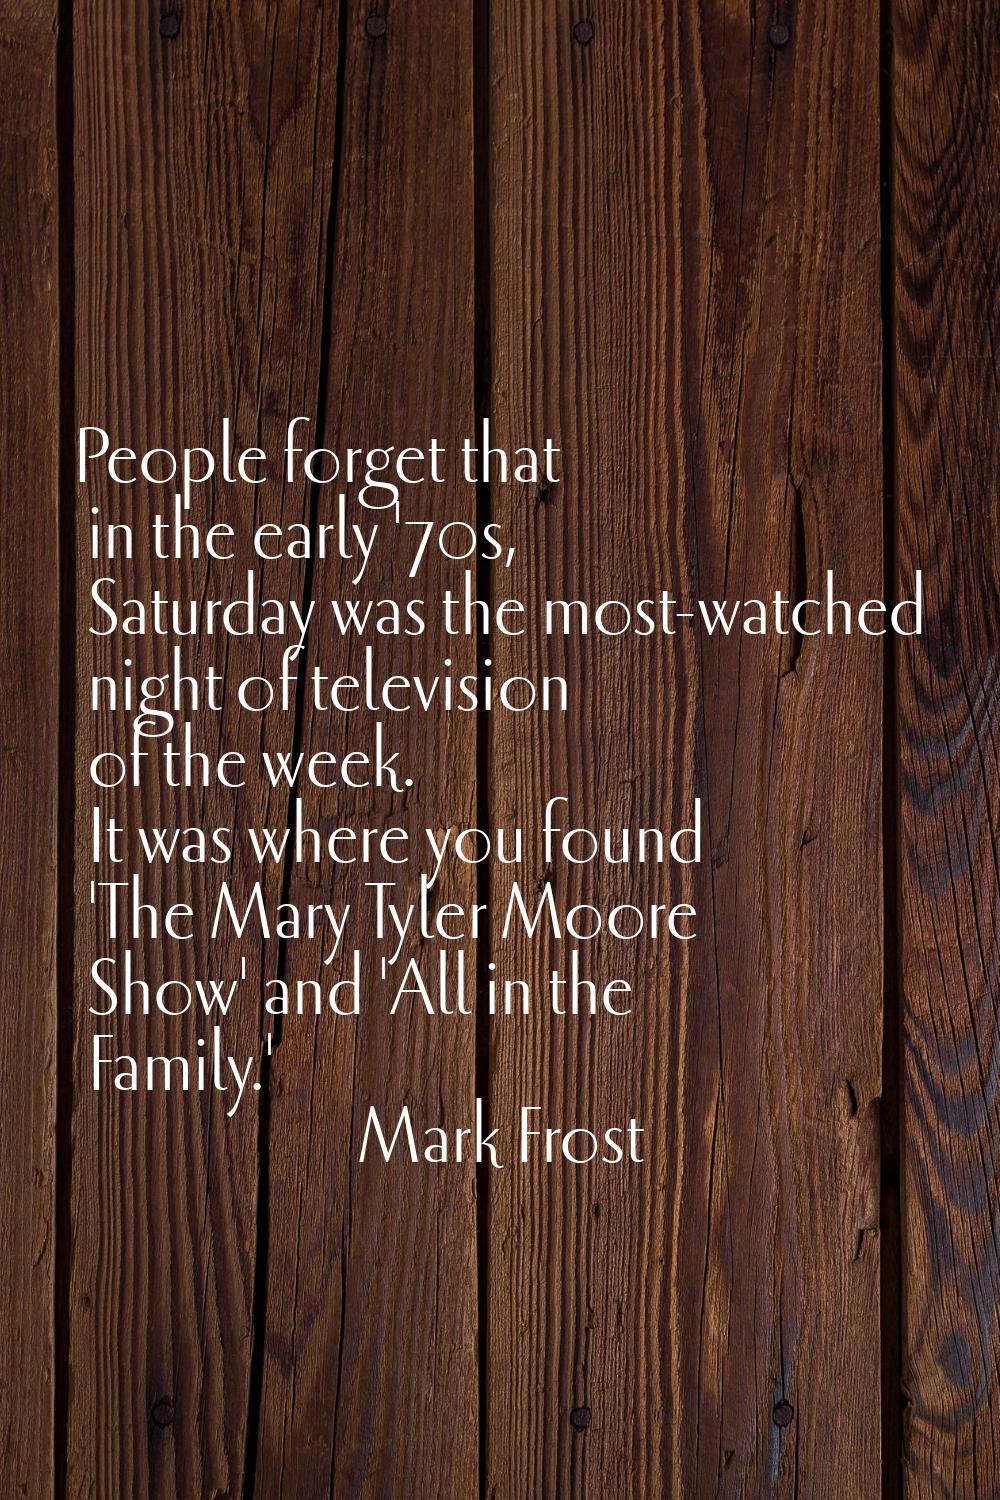 People forget that in the early '70s, Saturday was the most-watched night of television of the week